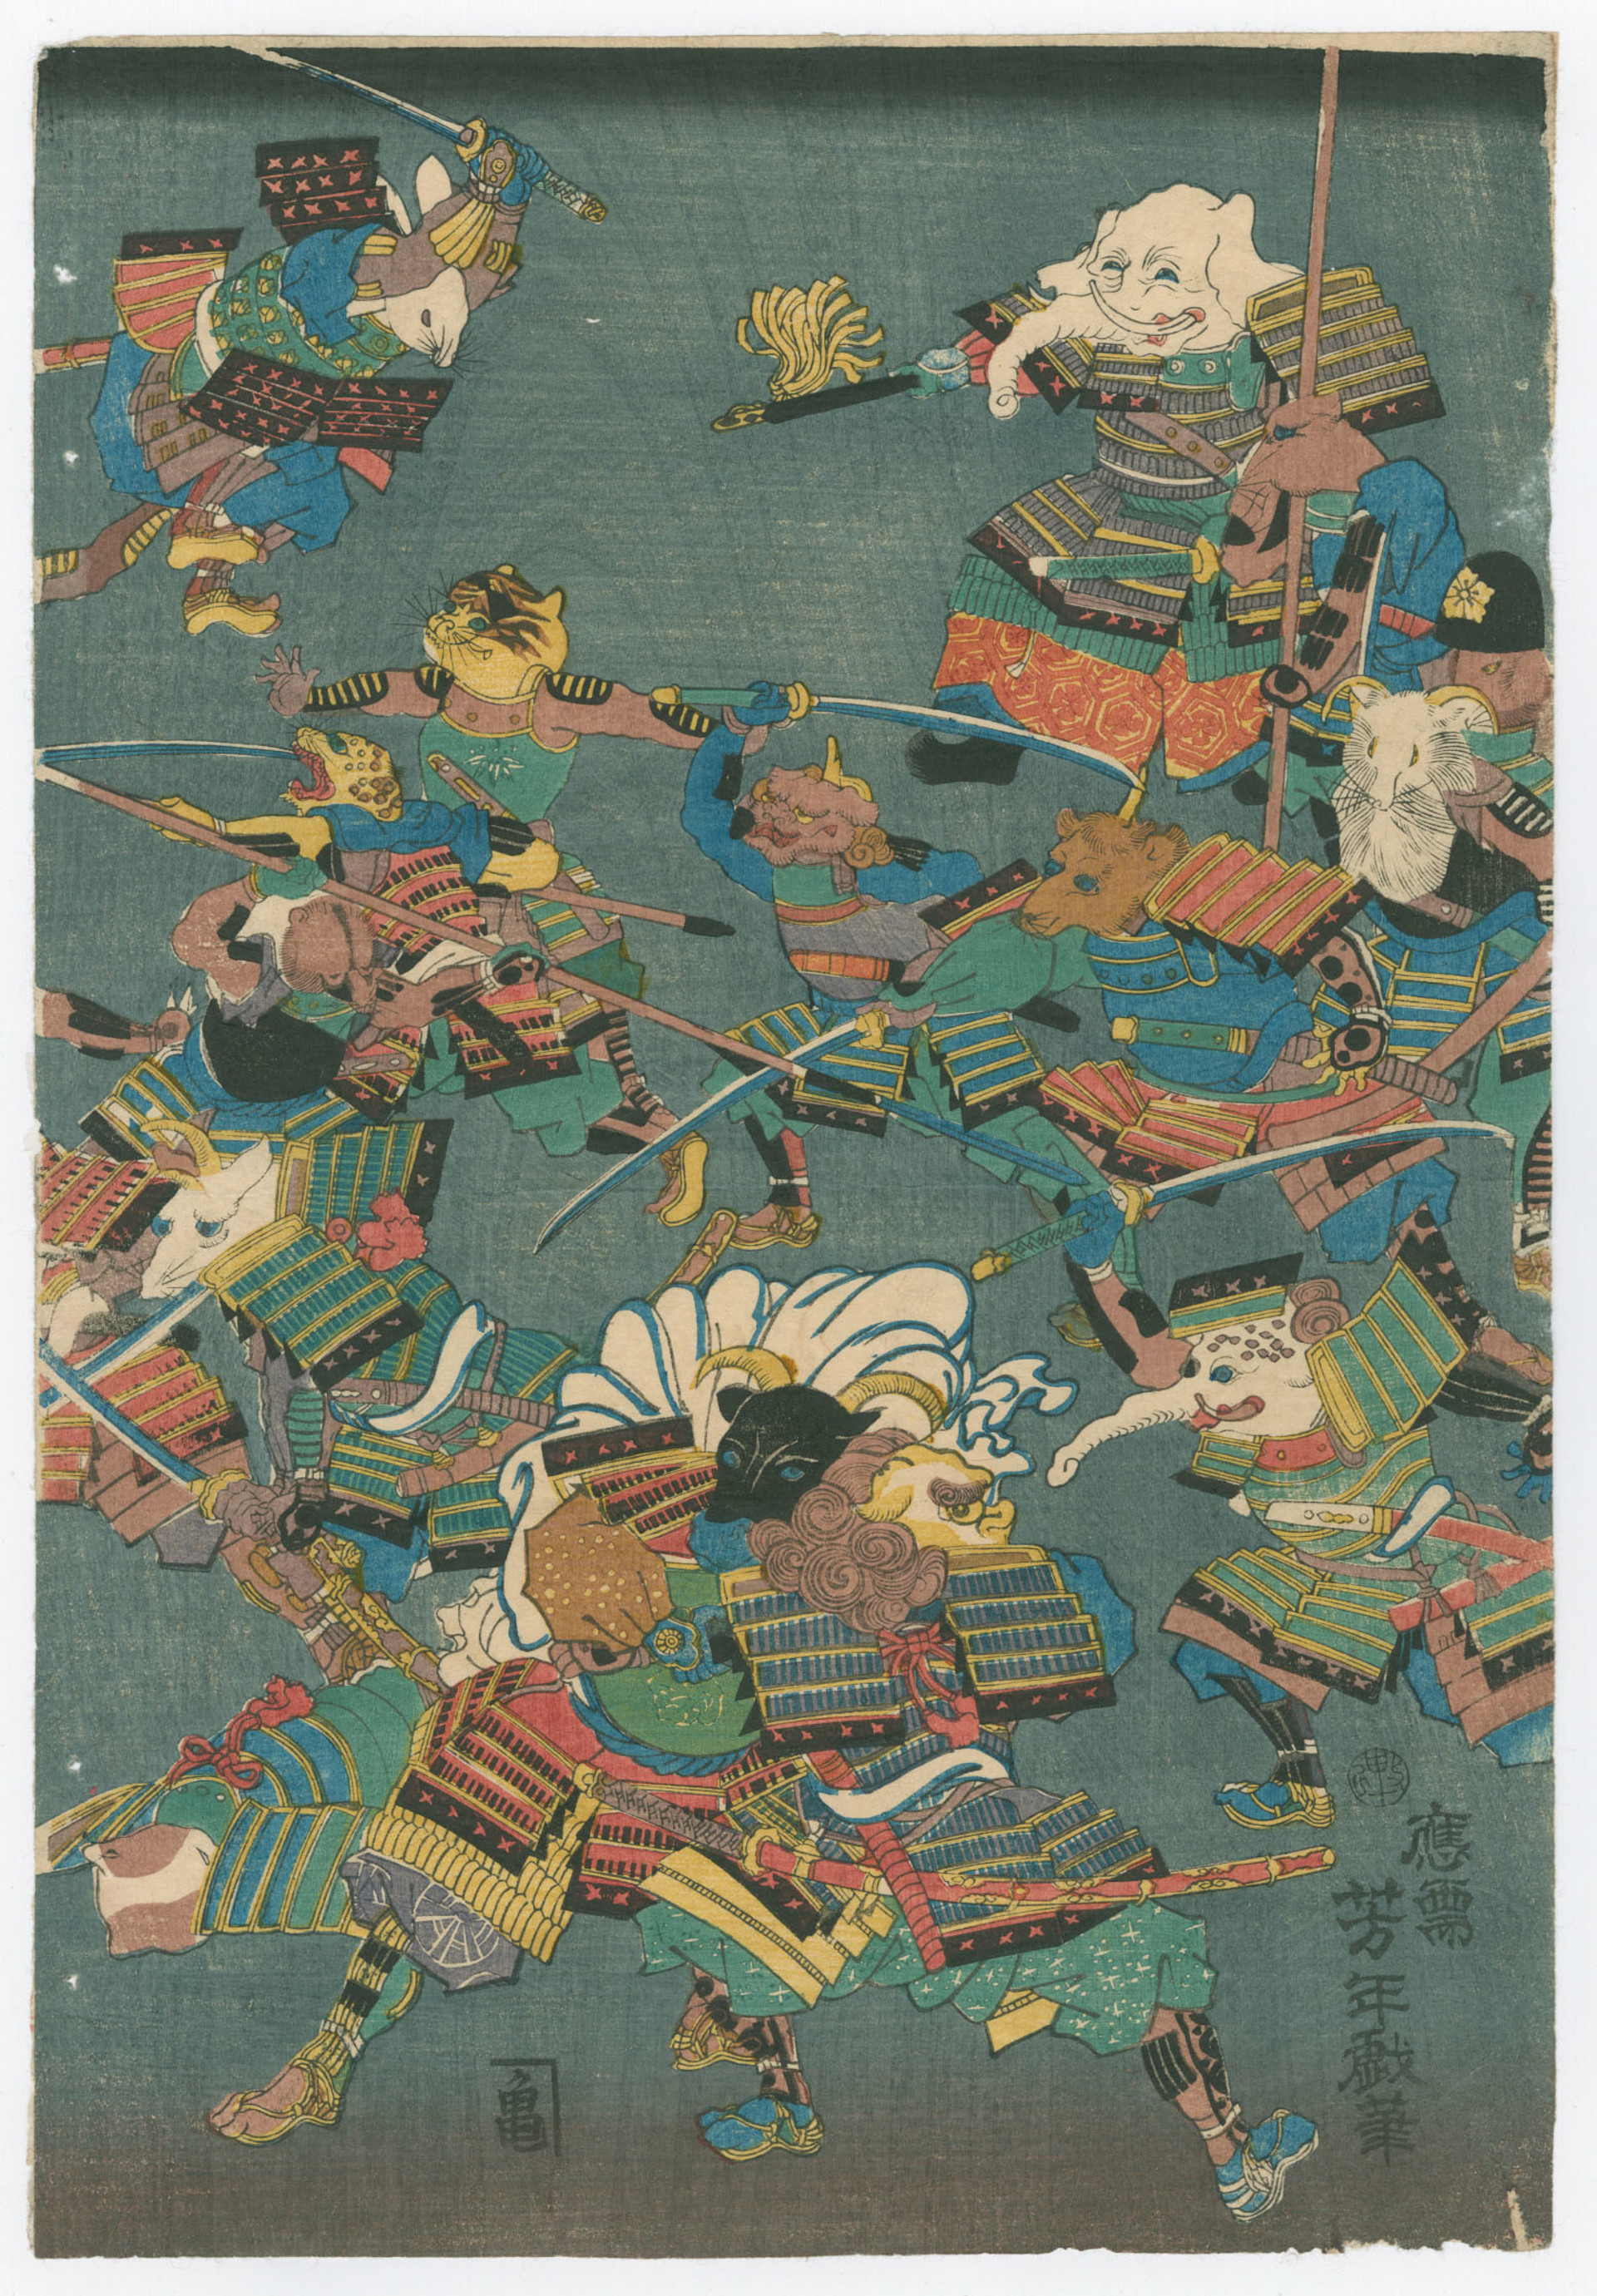 The Great Battle of Japanese and Chinese Animals by Yoshitoshi